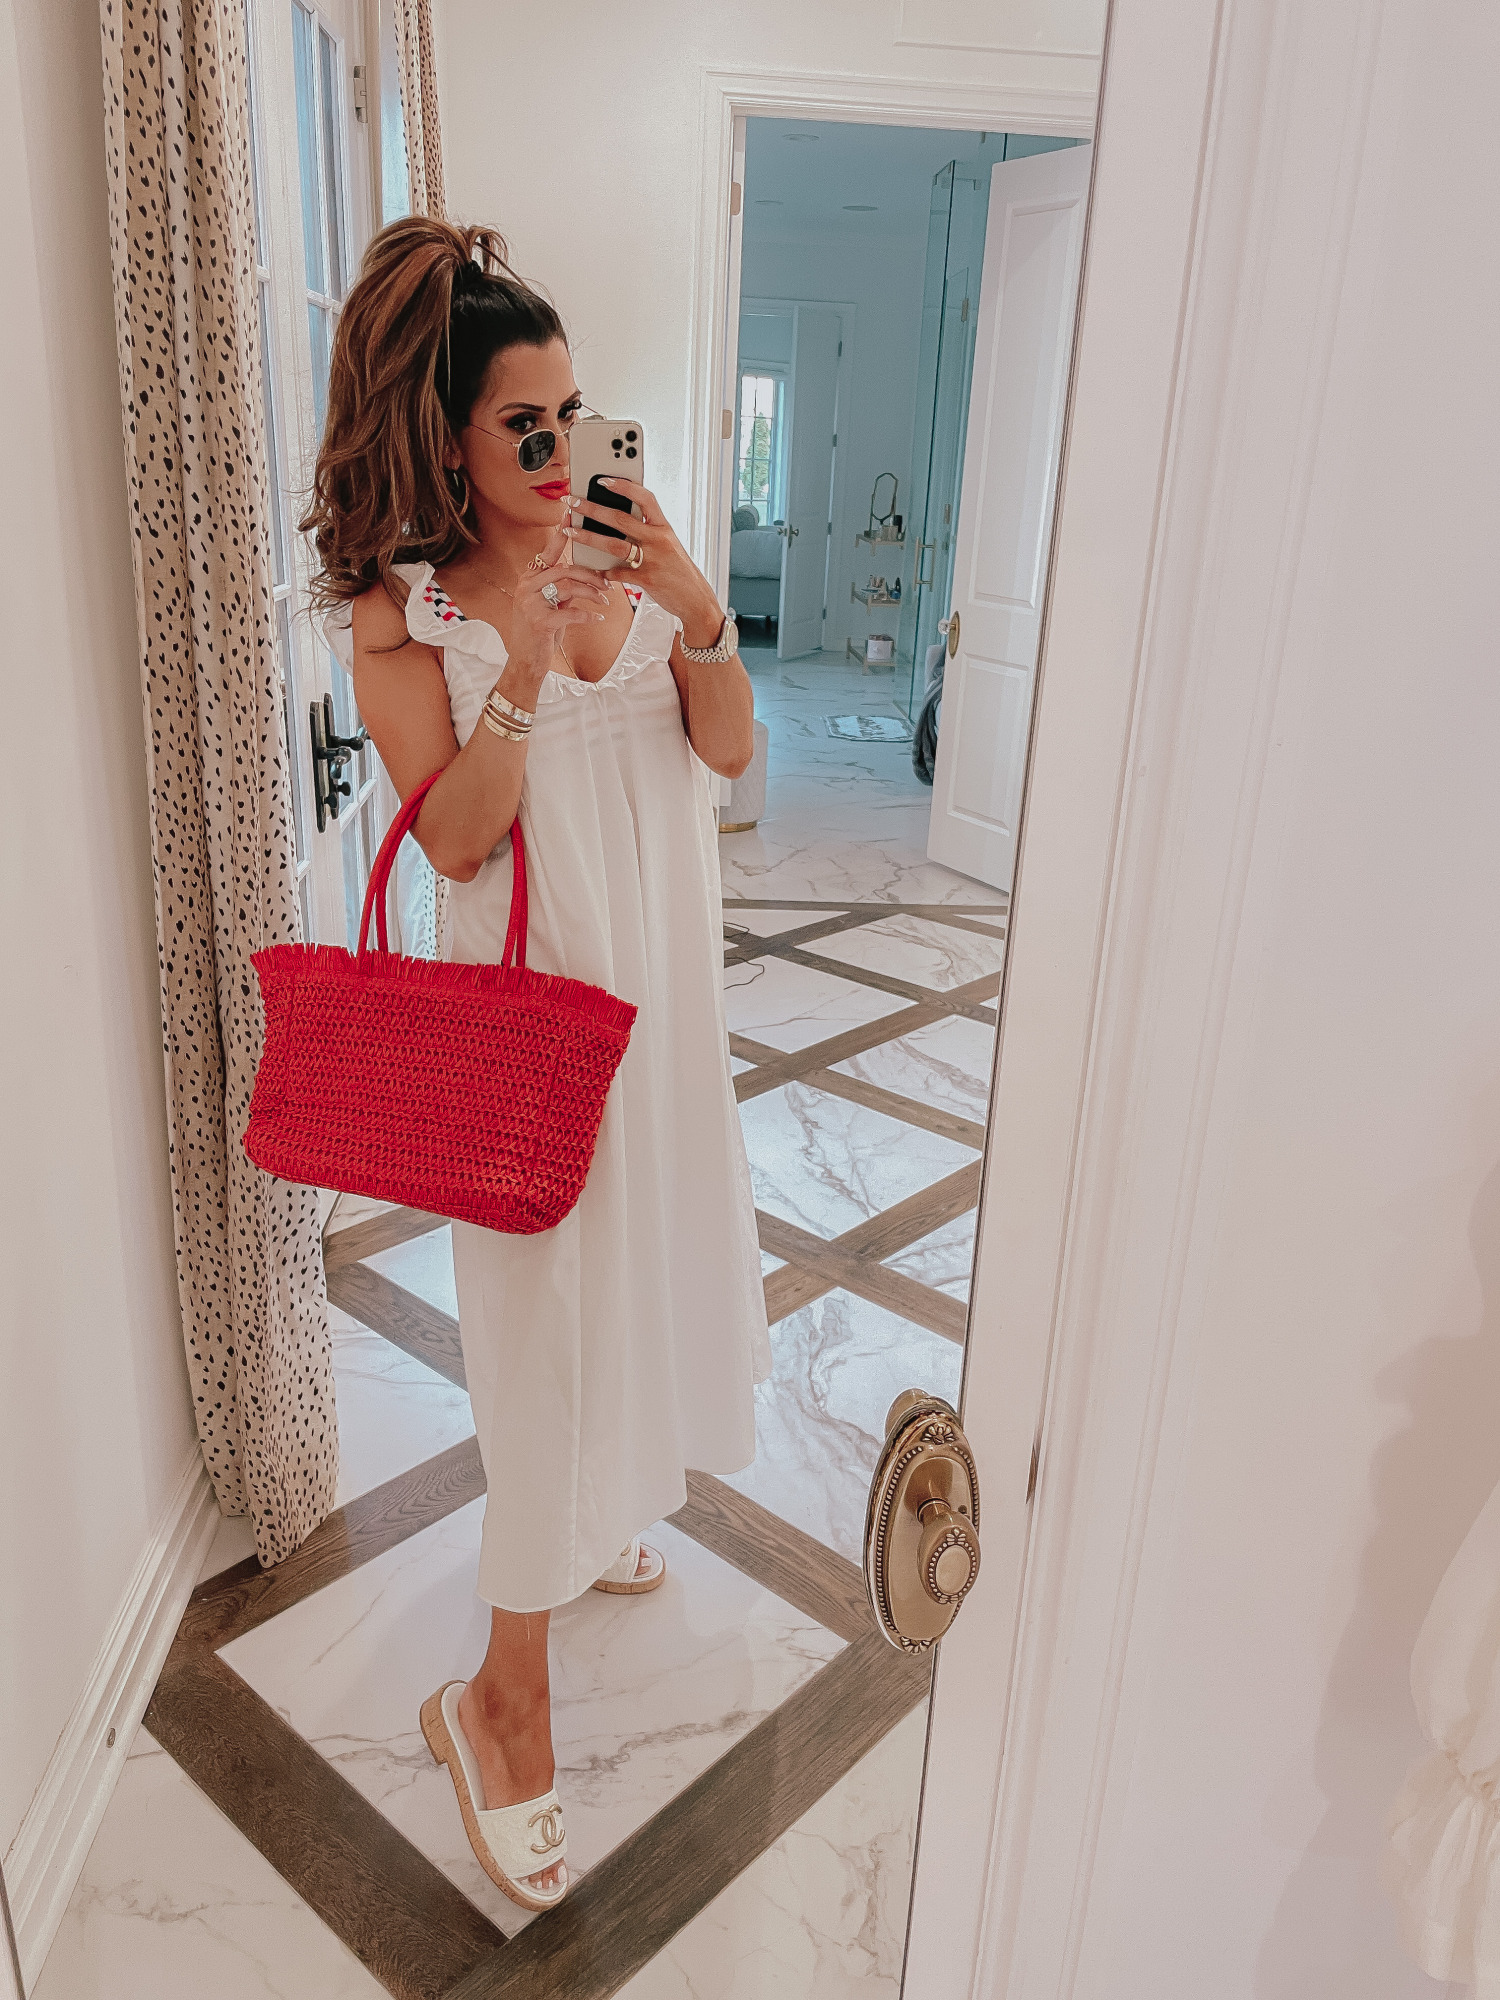 july 4 outfit inspiration 2021, pinterest july 4 outfit, gucci red lipstick goldie red, Emily gemma | June Instagram Recap by popular US fashion blog, The Sweetest Thing: image of Emily Gemma wearing a white maxi coverup, white sandals, and holding a red woven tote bag. 